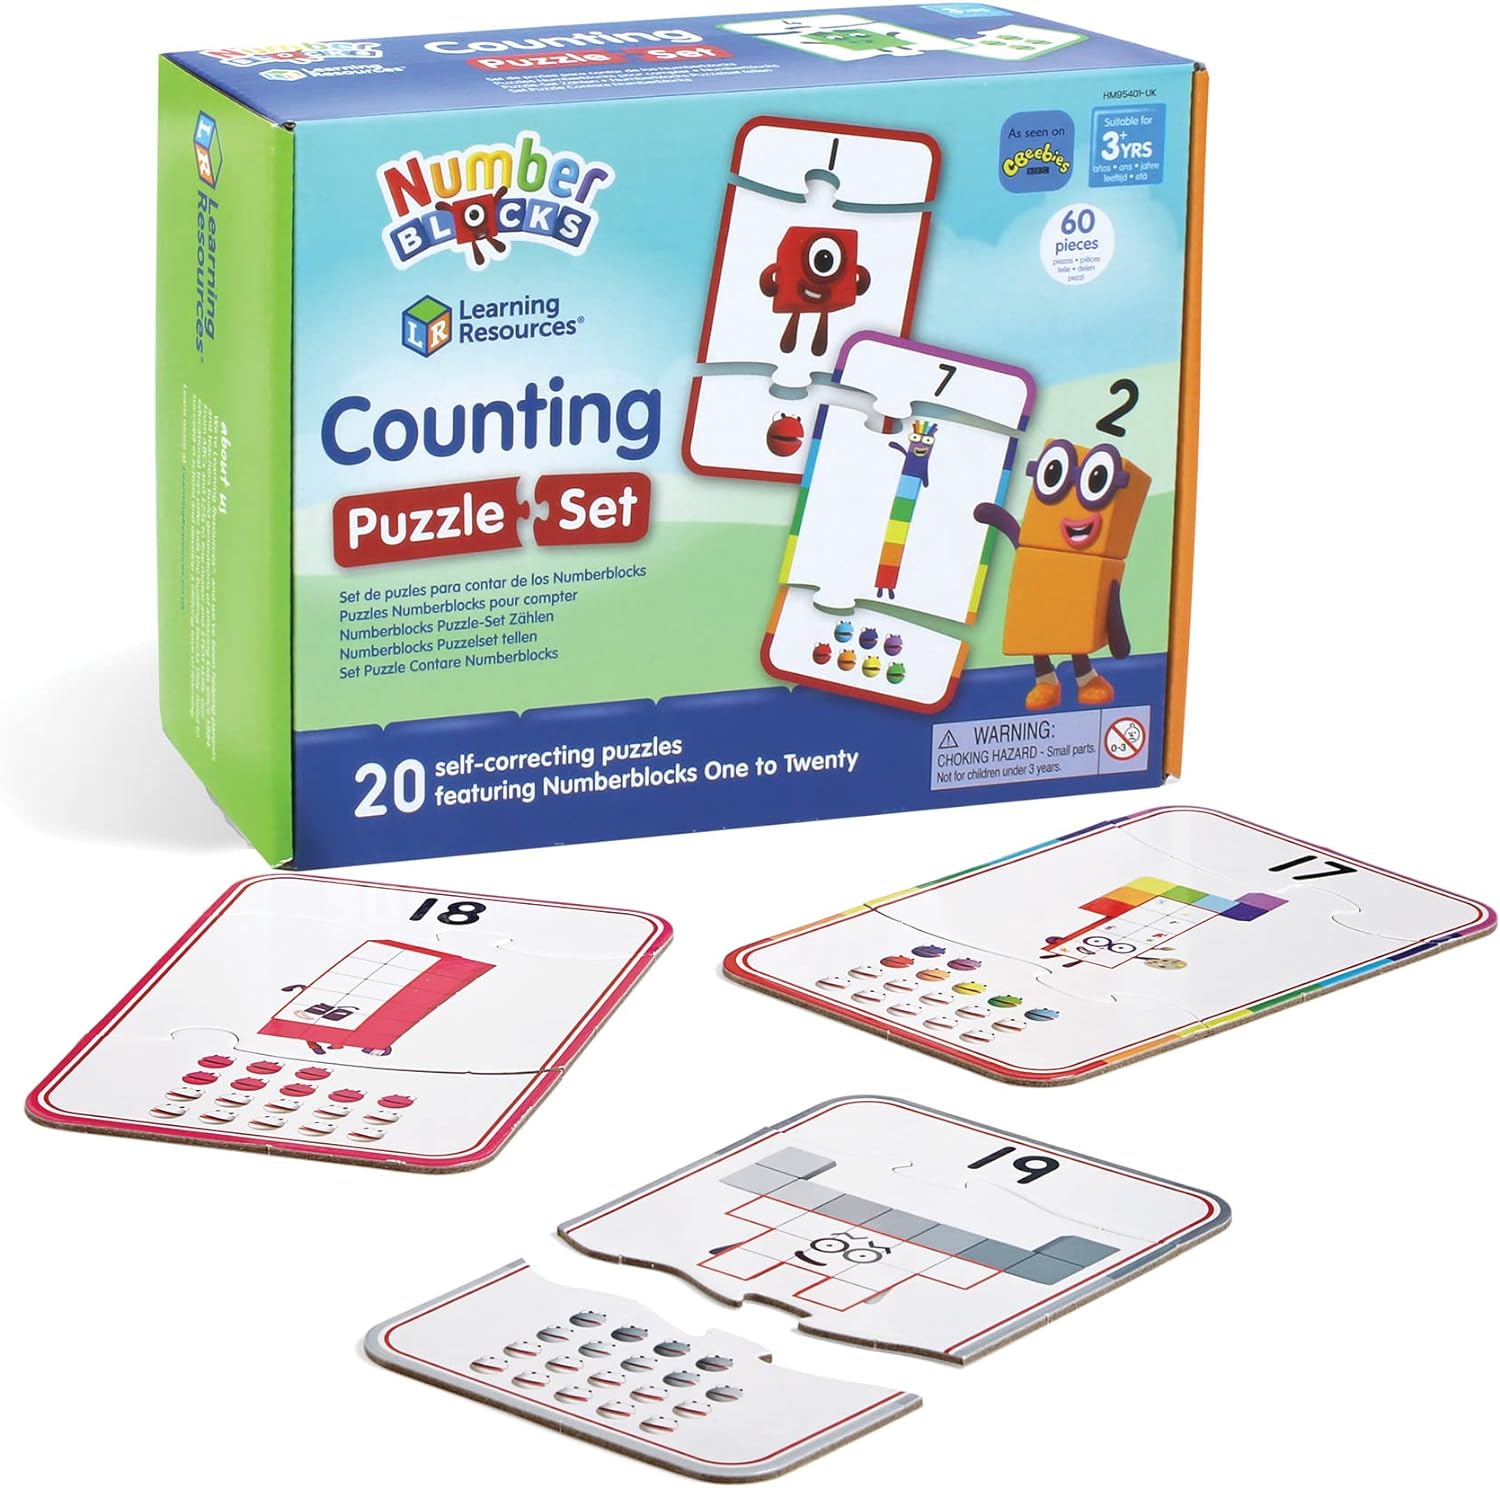 Numberblocks Counting Puzzle Set Learning Resources